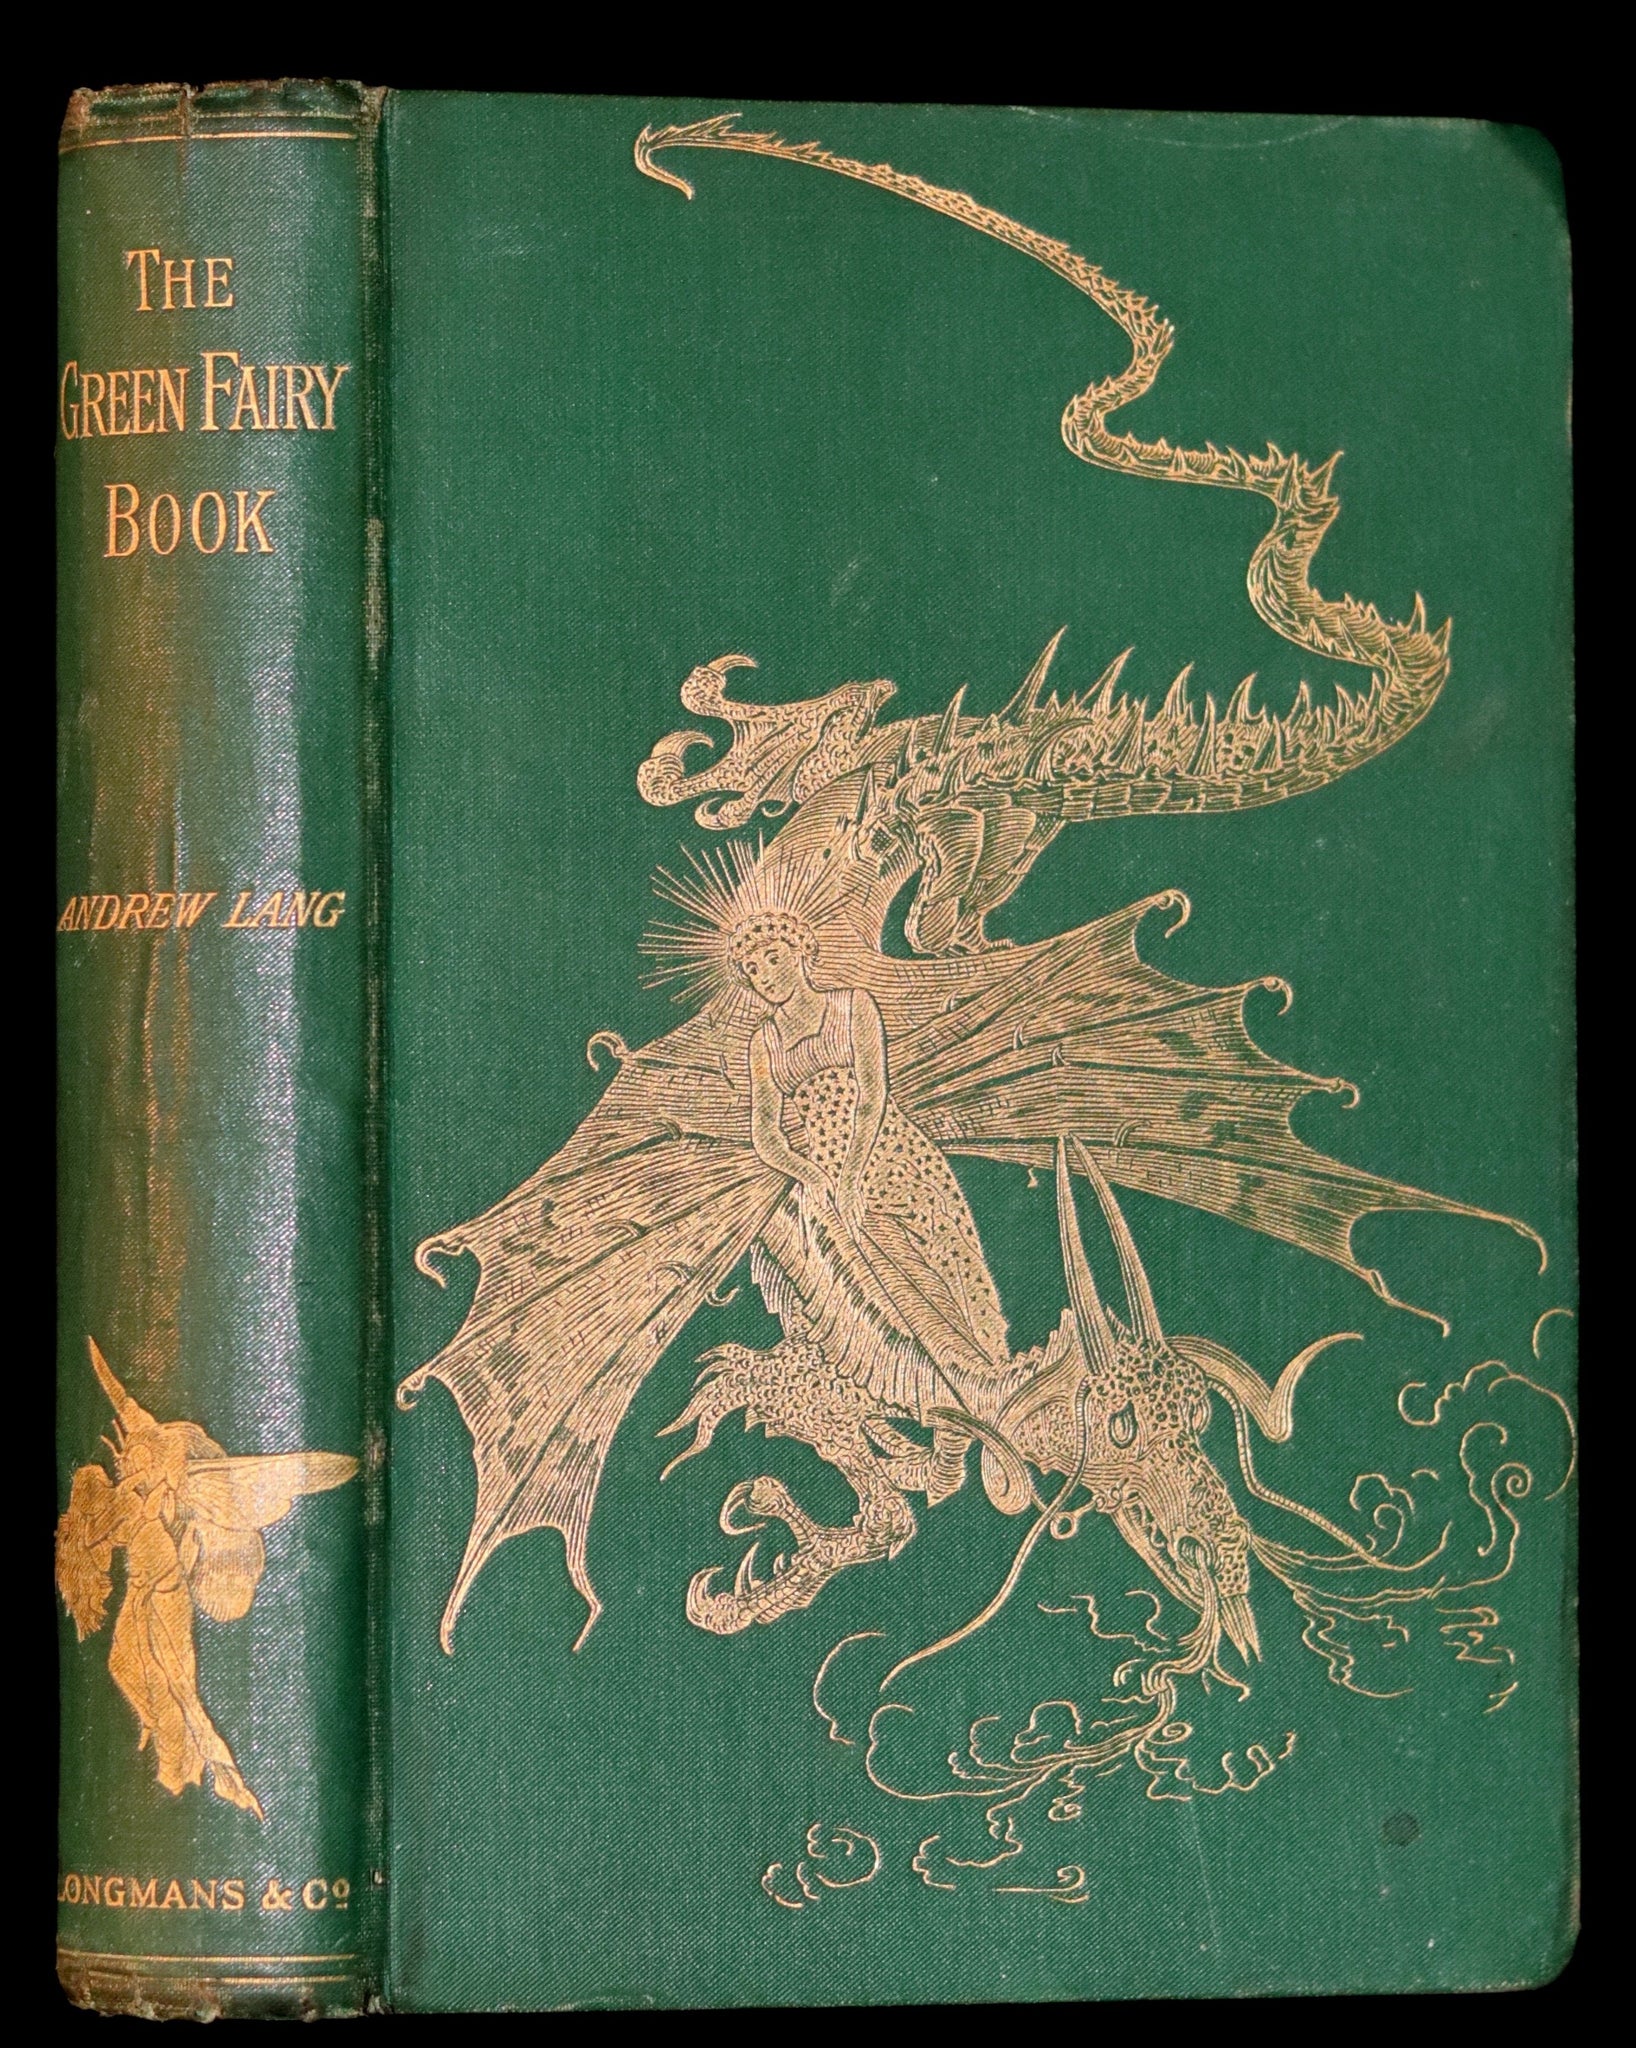 1892 Rare First Edition - The GREEN FAIRY BOOK by Andrew Lang Illustrated by H. J. FORD.